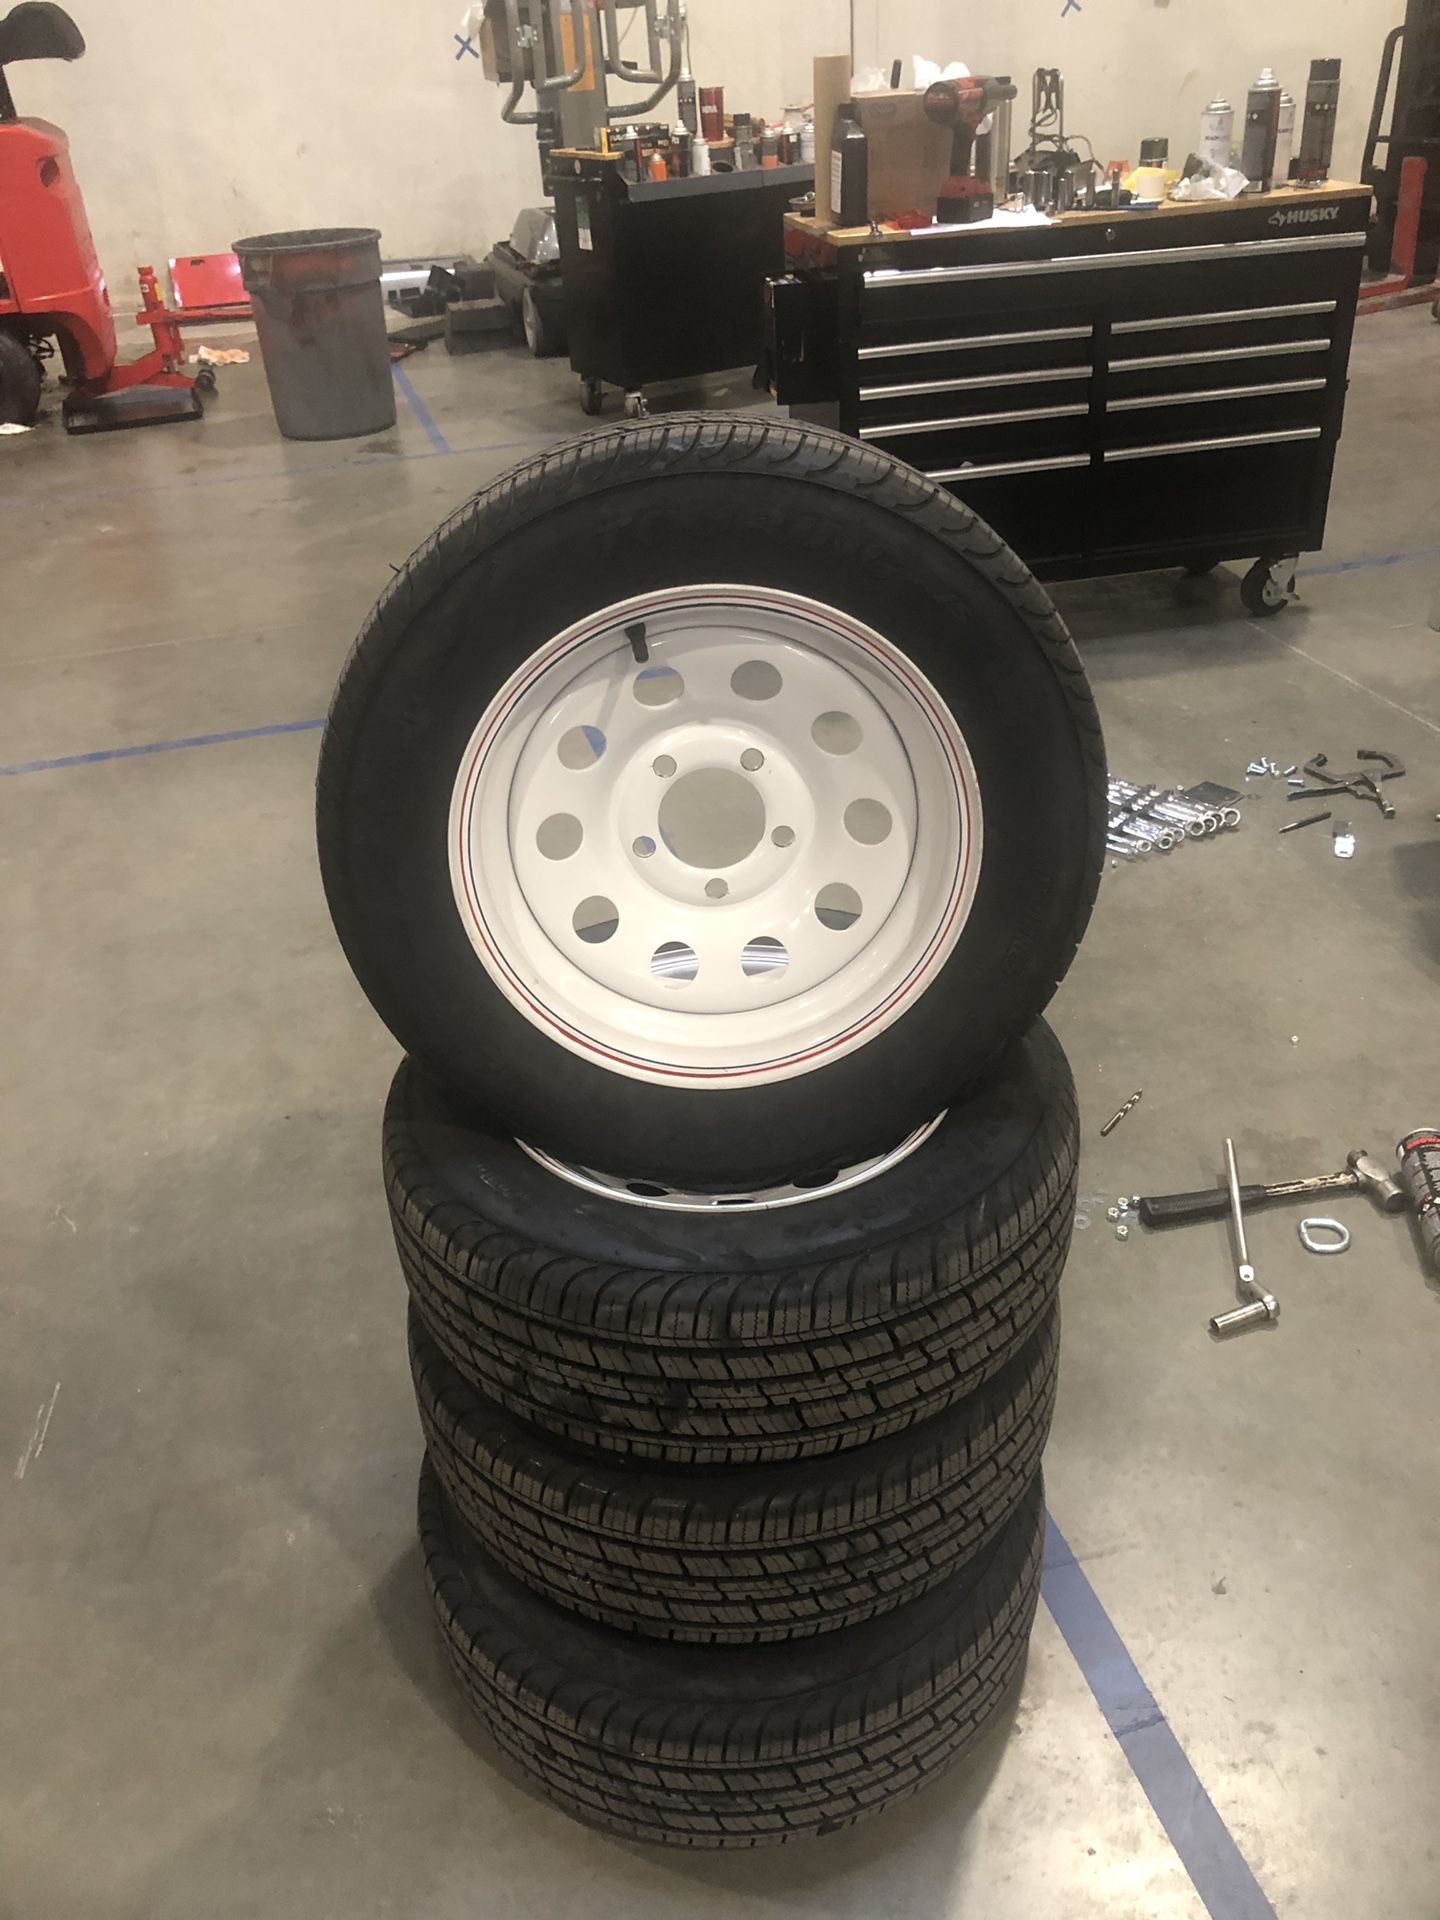 New Tires and Wheels never used Tires 185/65R14 5-4.5 Bolt Zero Offset